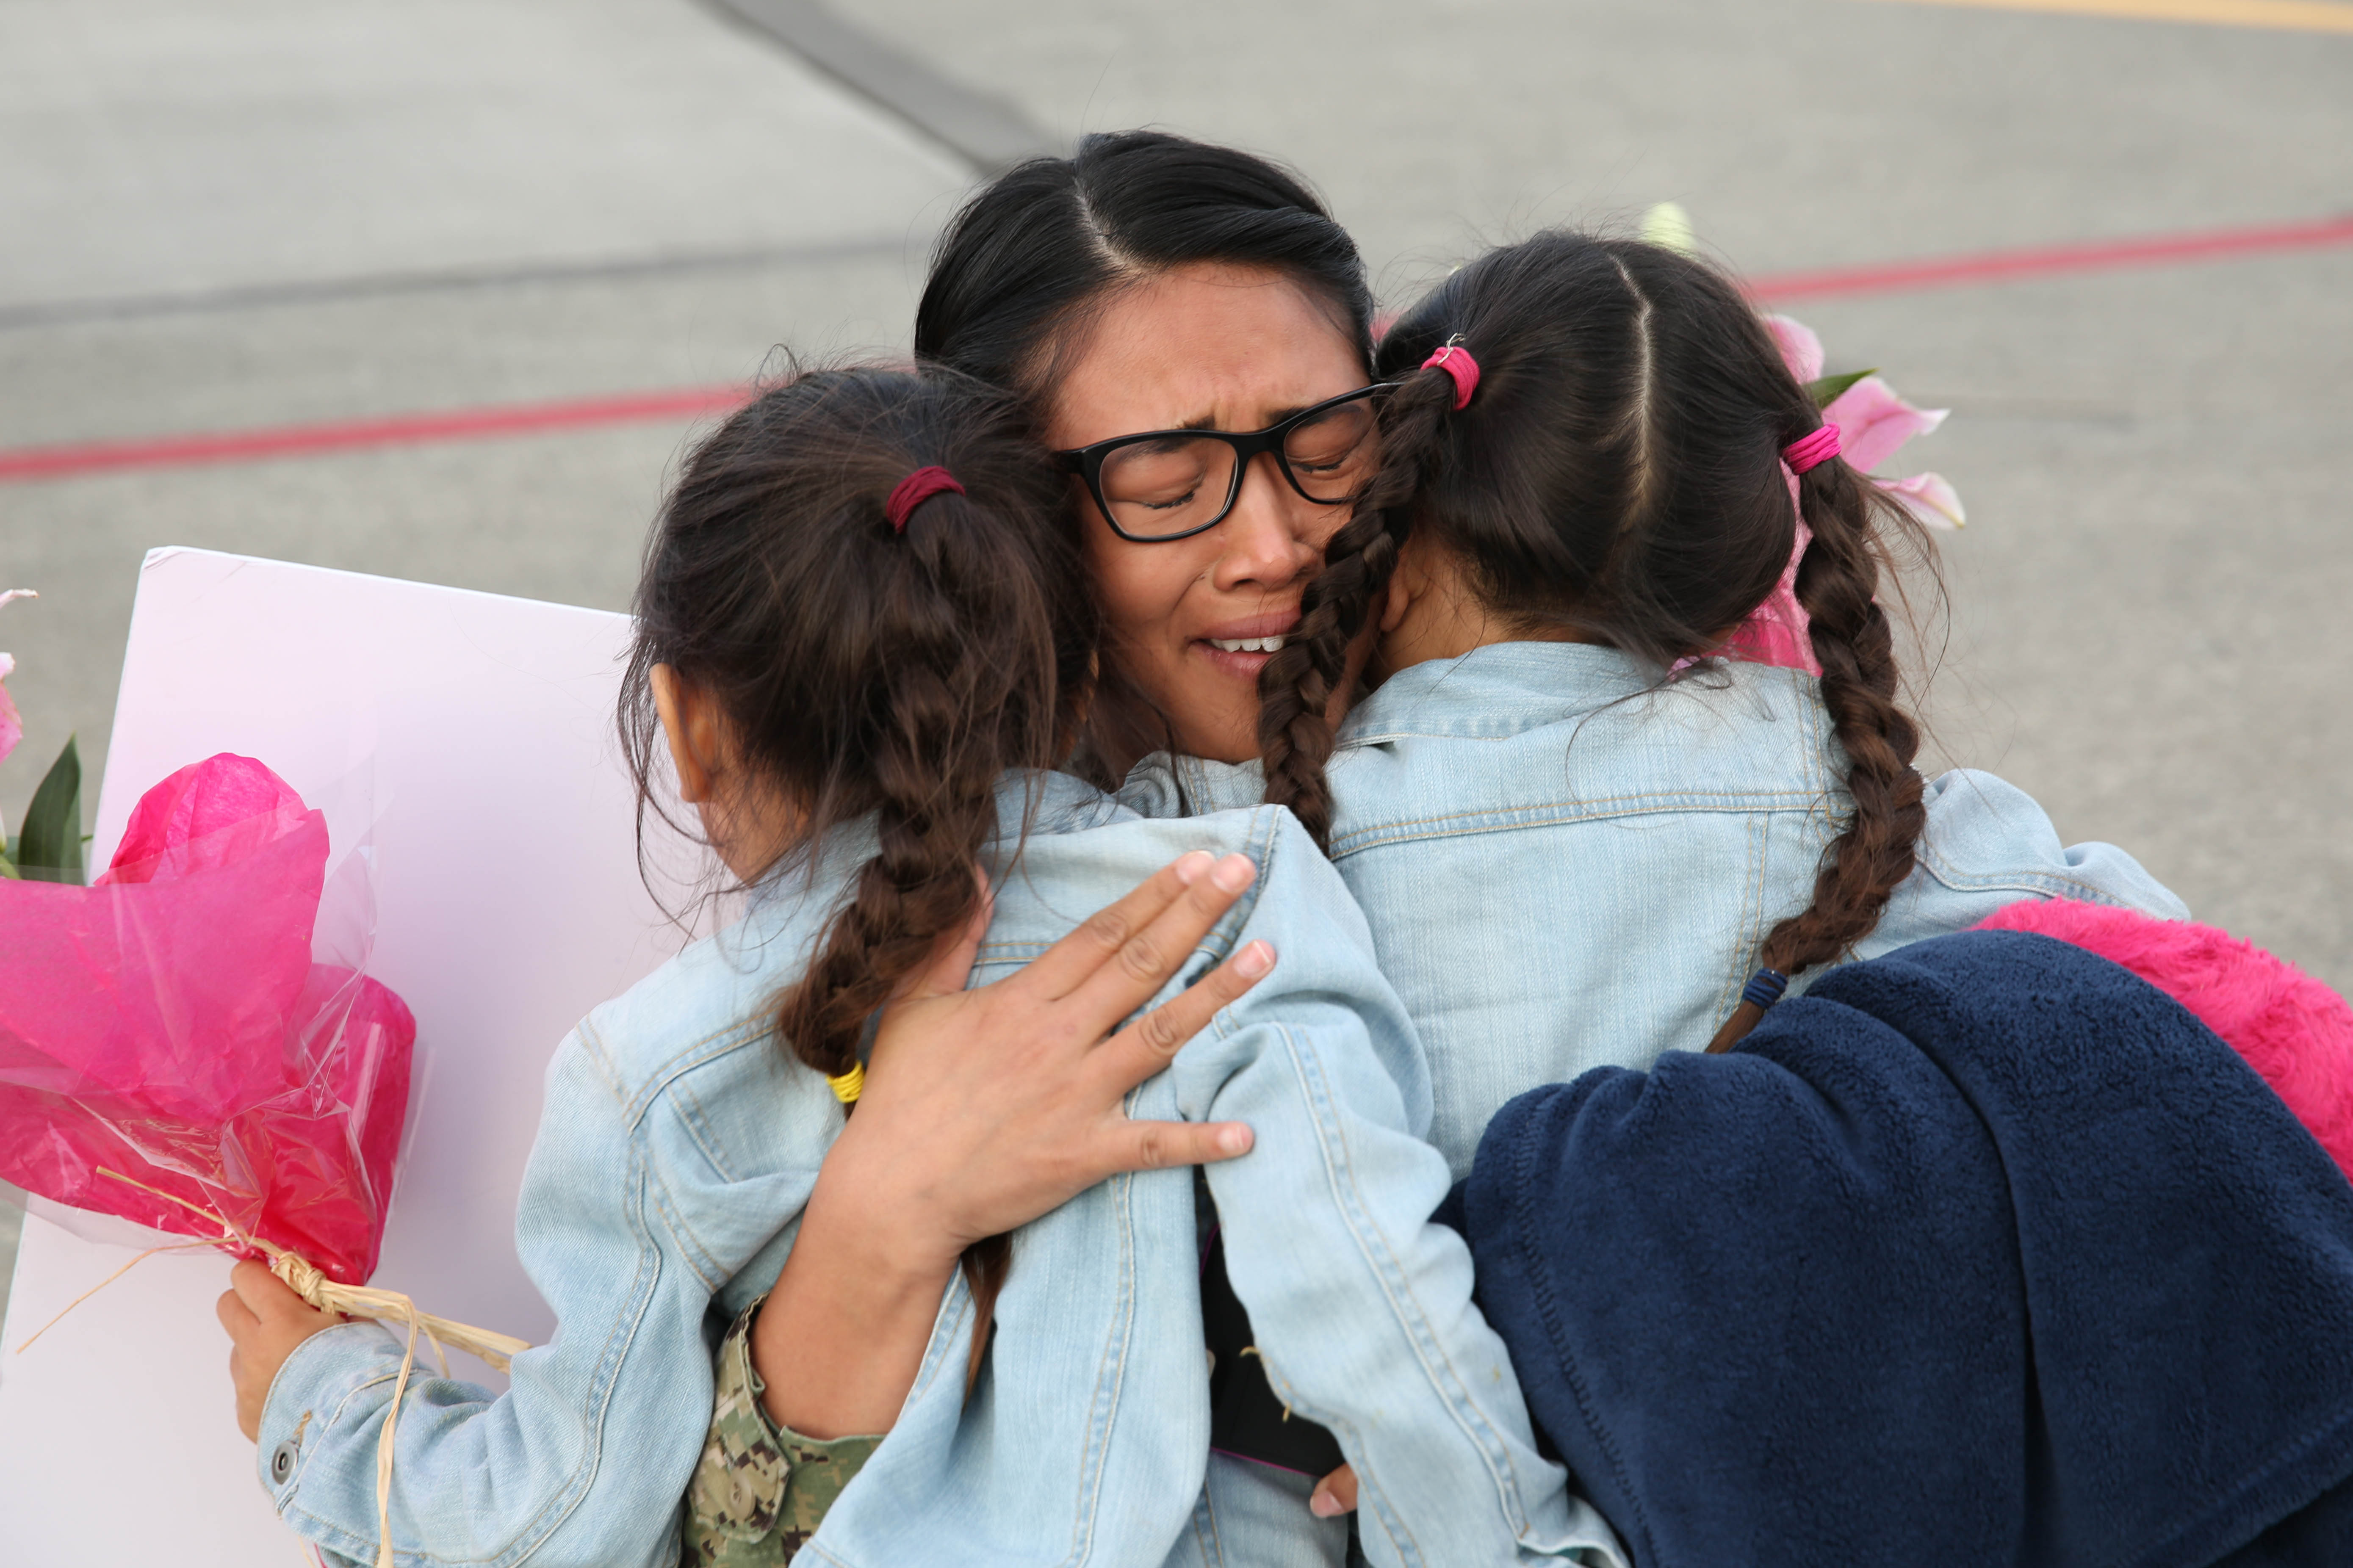 160929-N-DC740-012 OAK HARBOR, Wash. (Sept. 29, 2016) Petty Officer 1st Class Jamaica Francia, Electronic Attack Squadron 138, hugs her daughters after returning home from deployment at Naval Air Station Whidbey Island. Electronic Attack Squadron 138 conducted electronic warfare operations in the 7th Fleet area of responsibility. (U.S. Navy photo by Petty Officer 2nd Class John Hetherington/Released)

